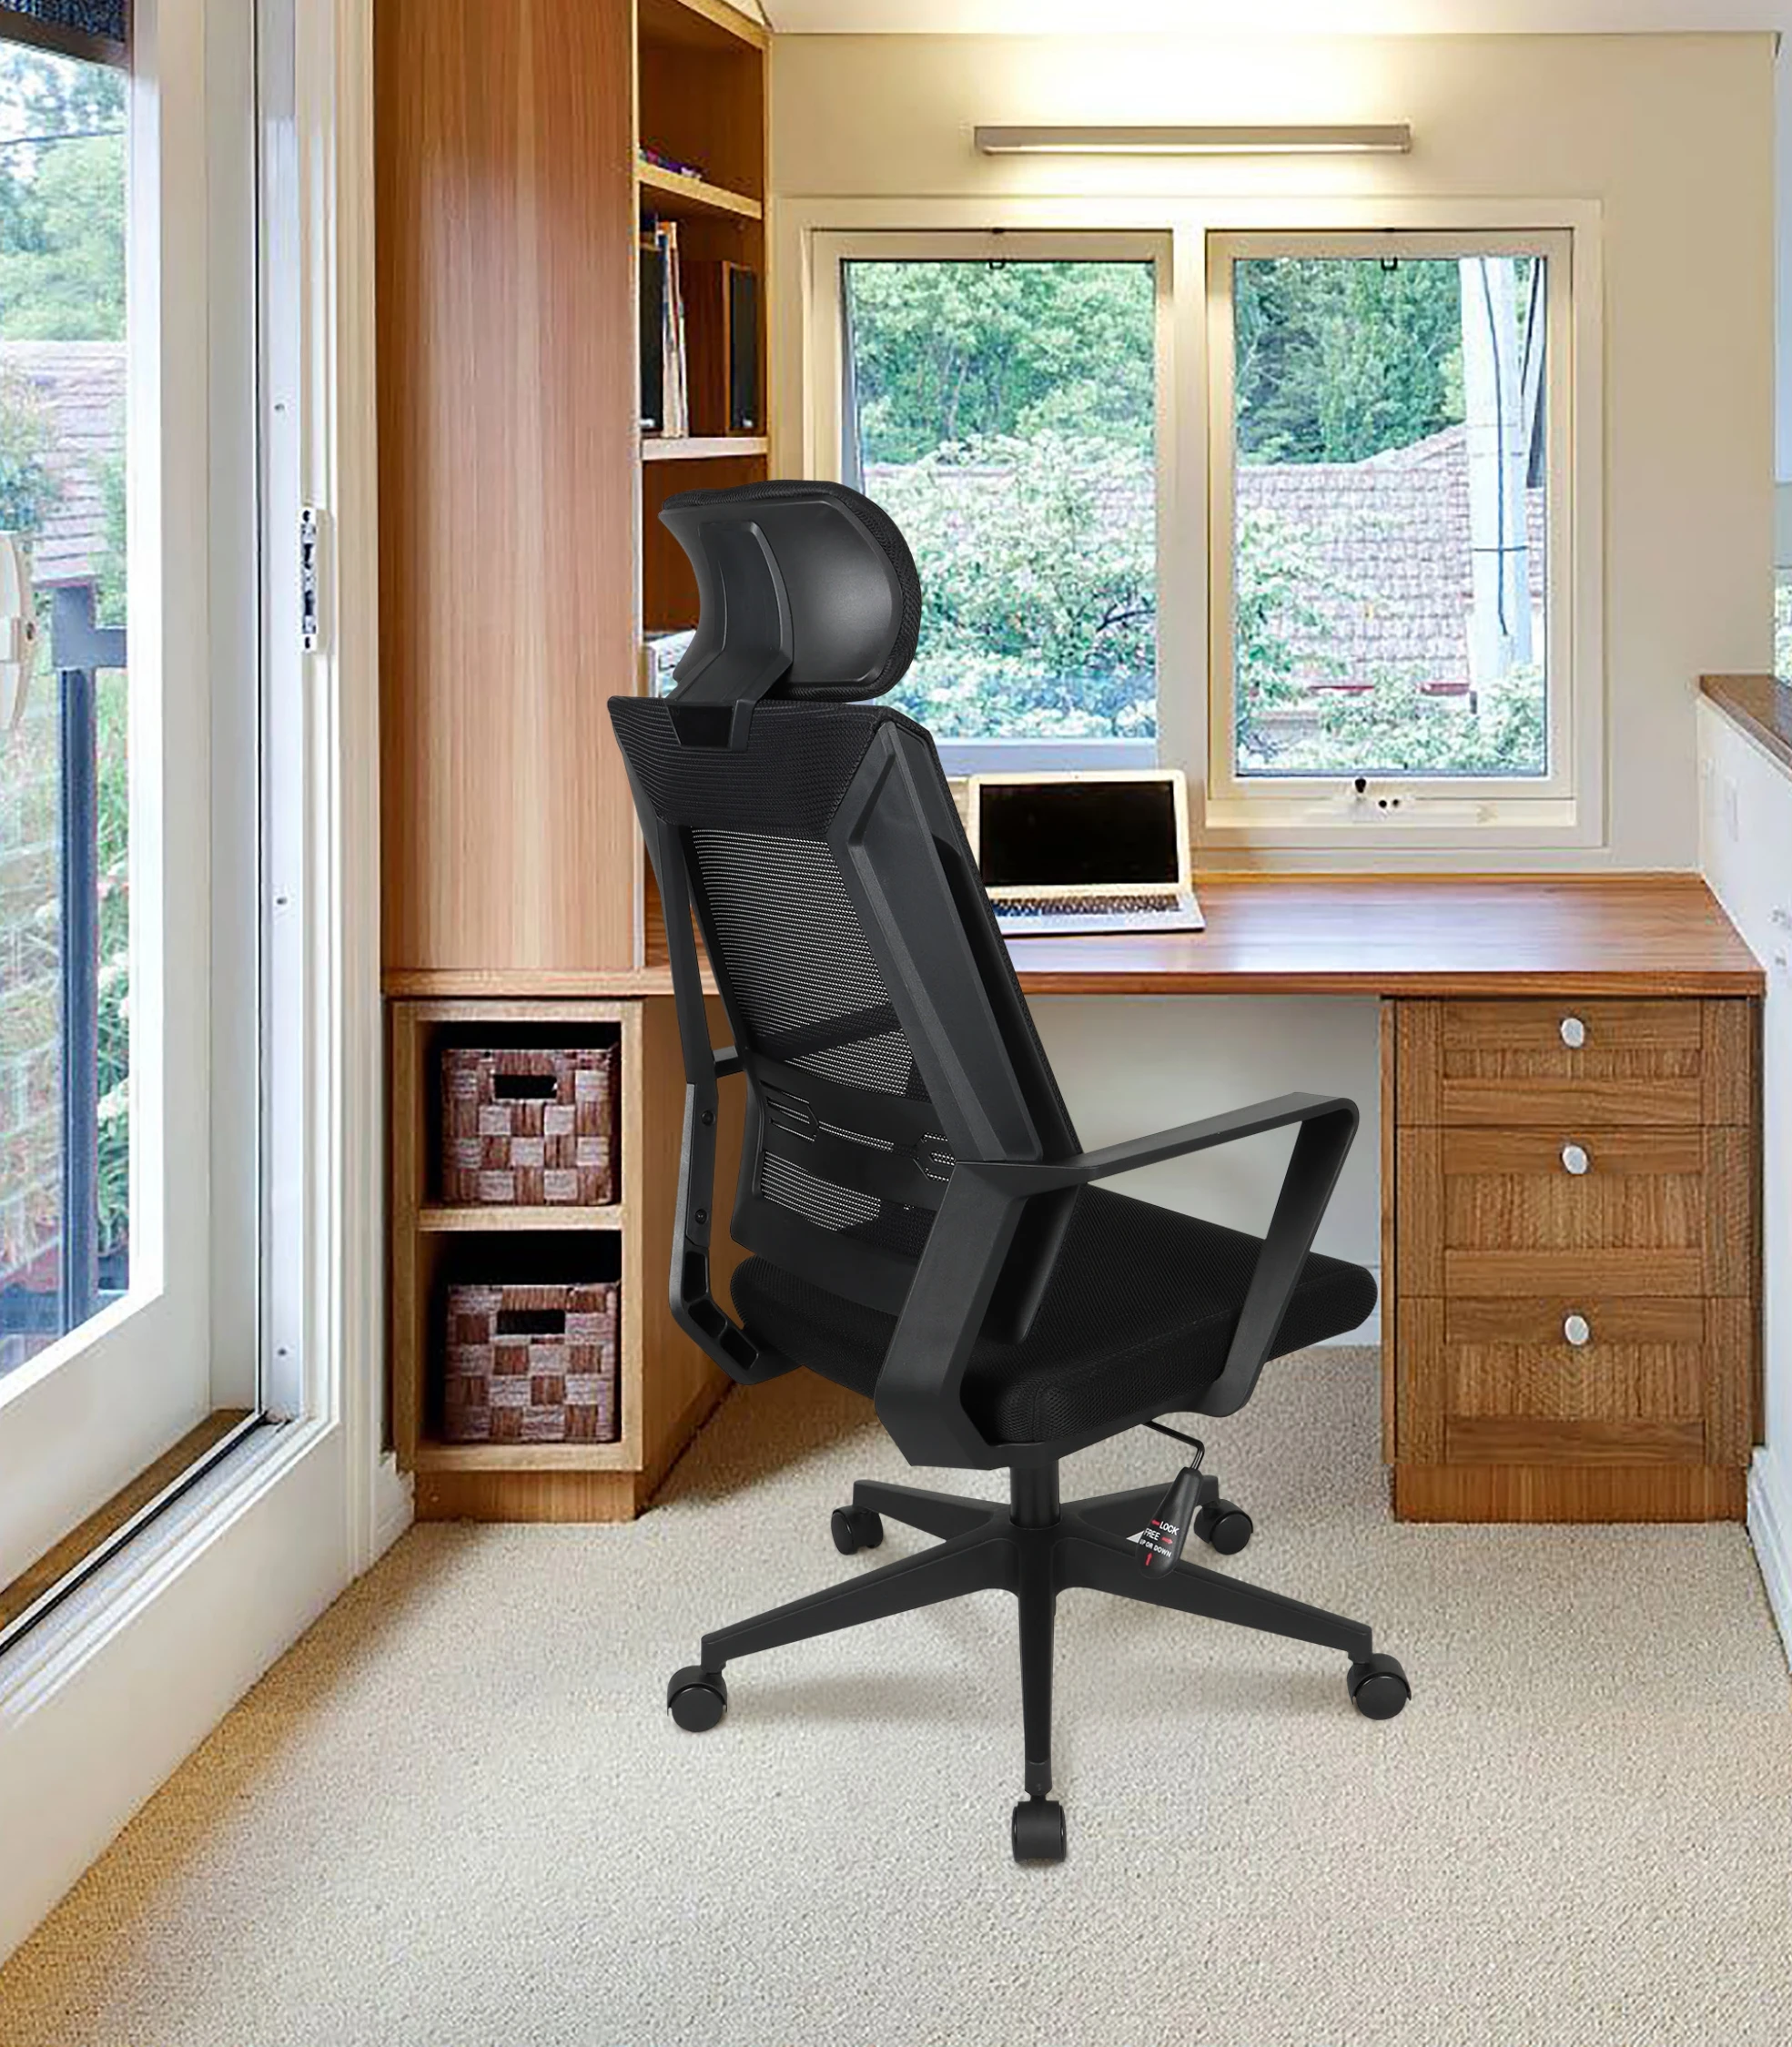 Kuohu China Suppliers Modern Swivel Mesh Home Office Chair Prices Cheap Ergonomic Office Chair for Meeting Room